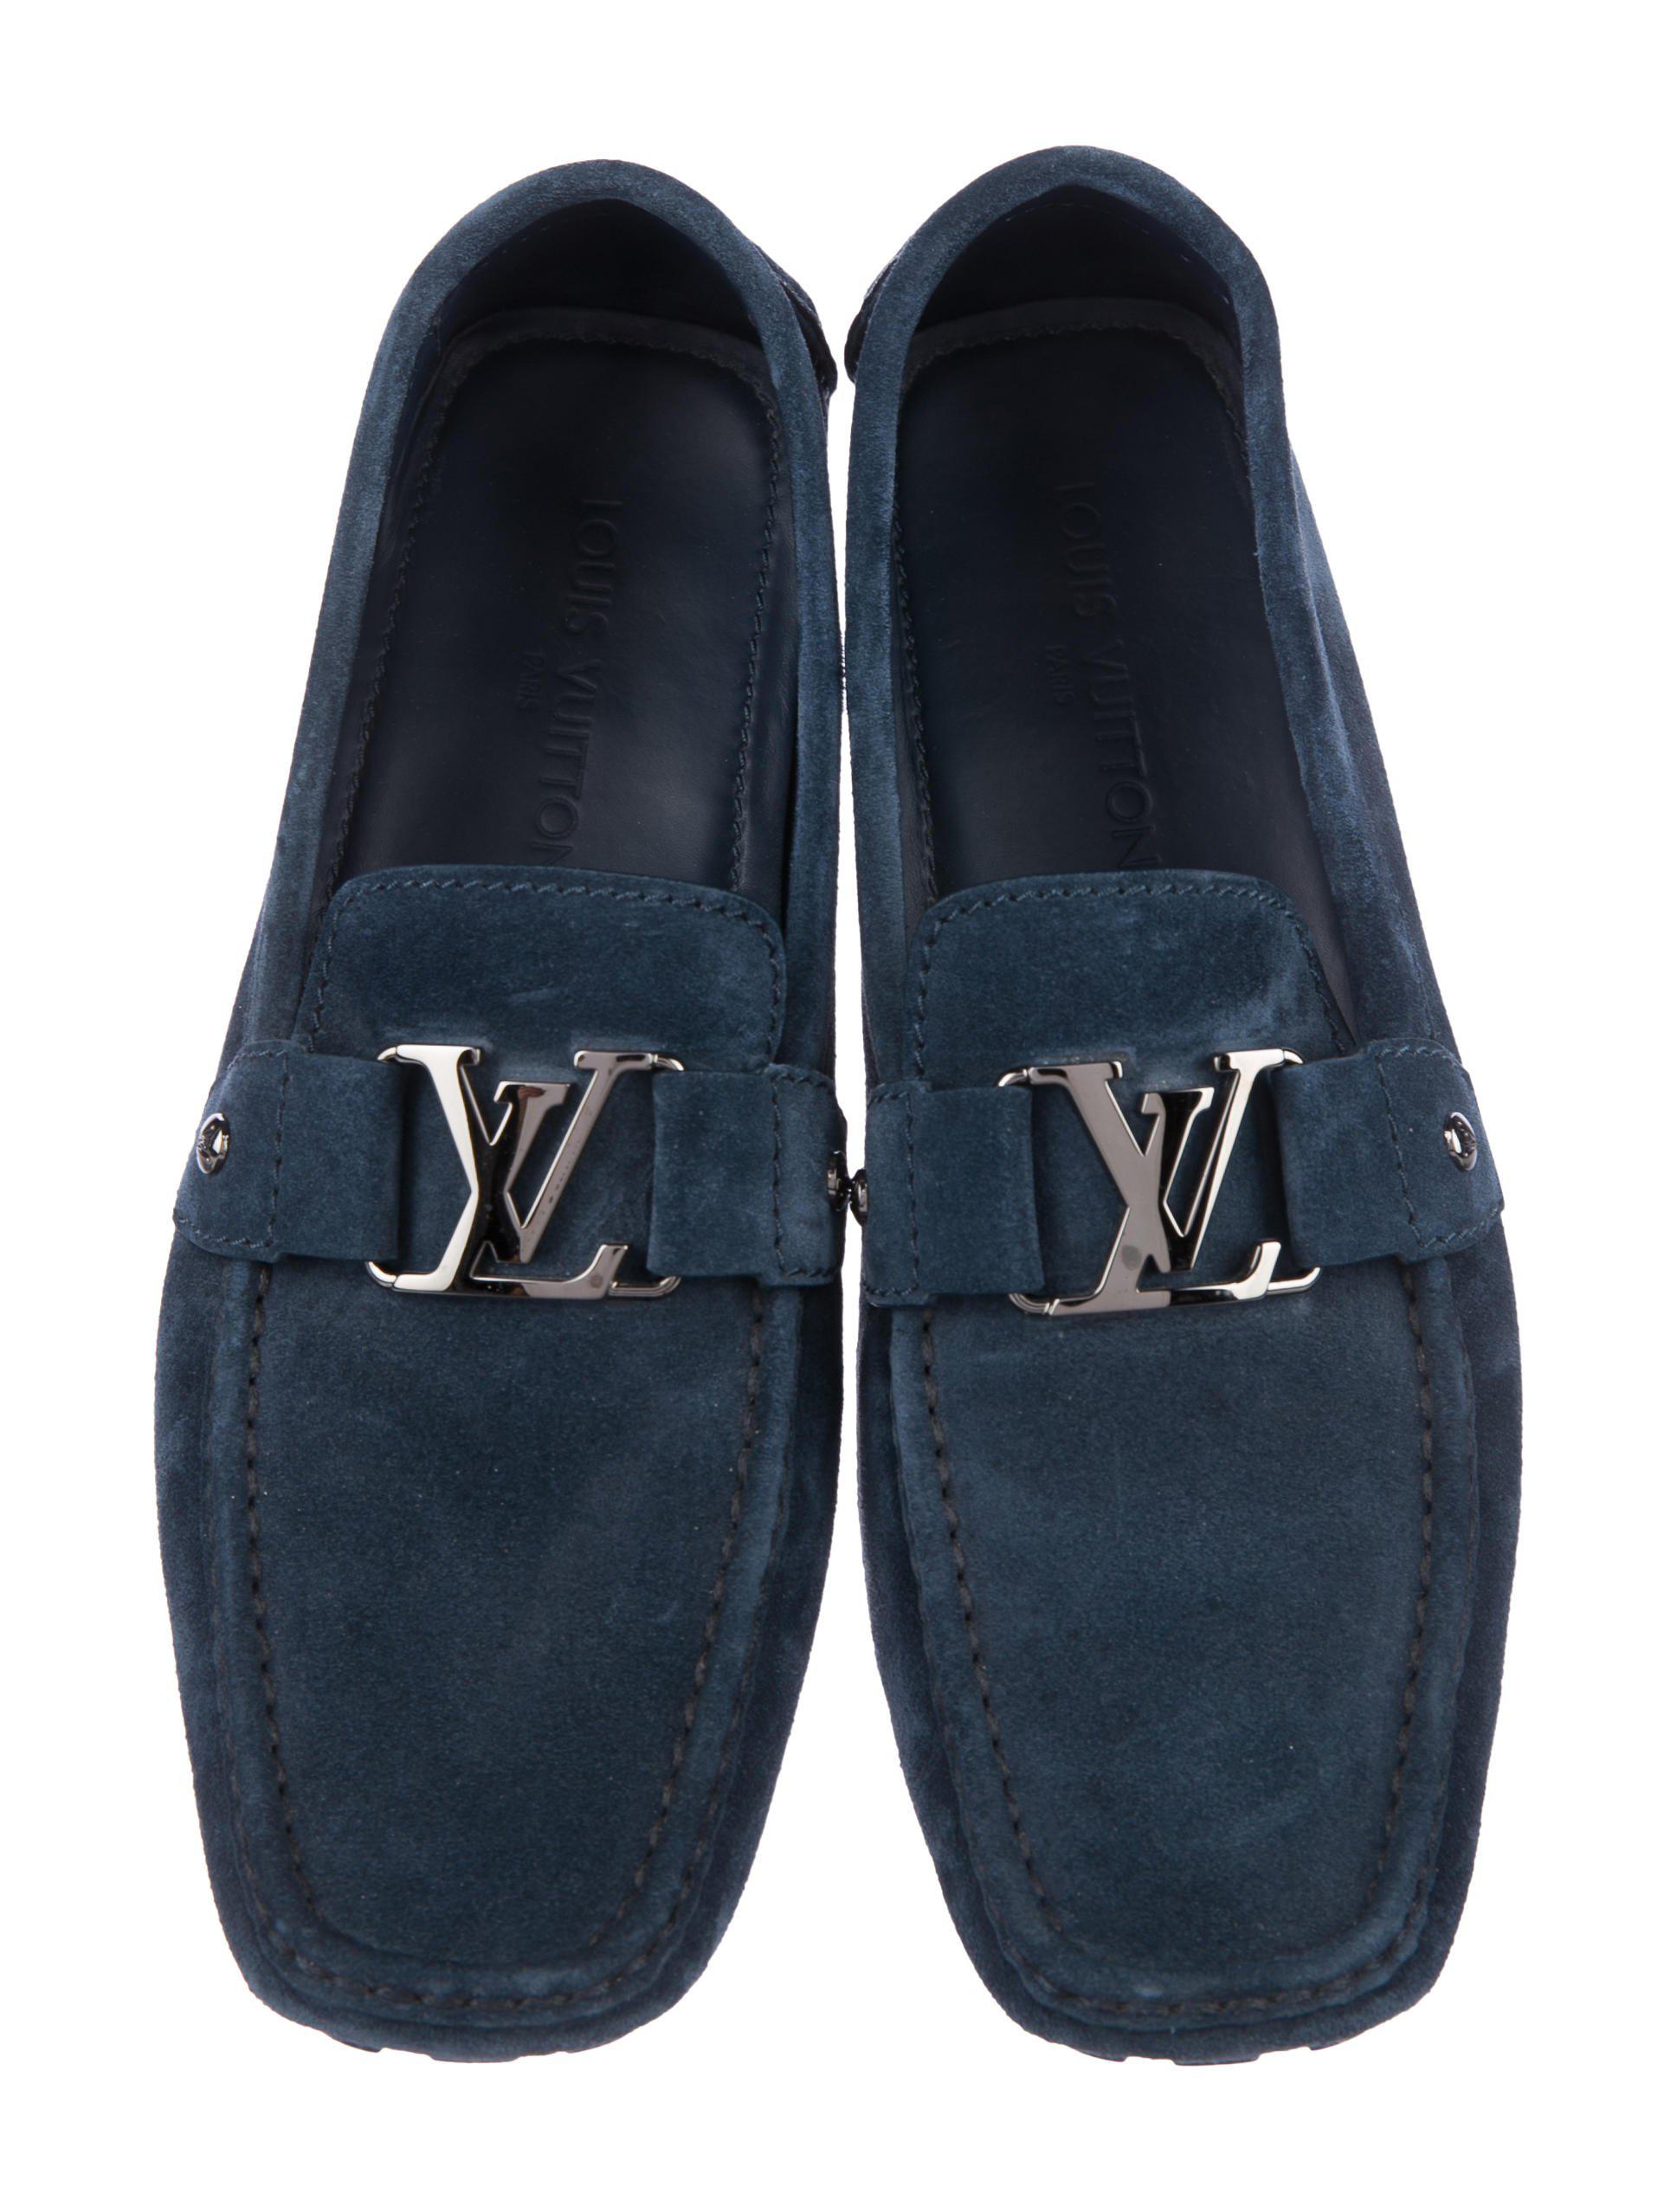 Lyst - Louis Vuitton Monte Carlo Suede Loafers in Blue for Men